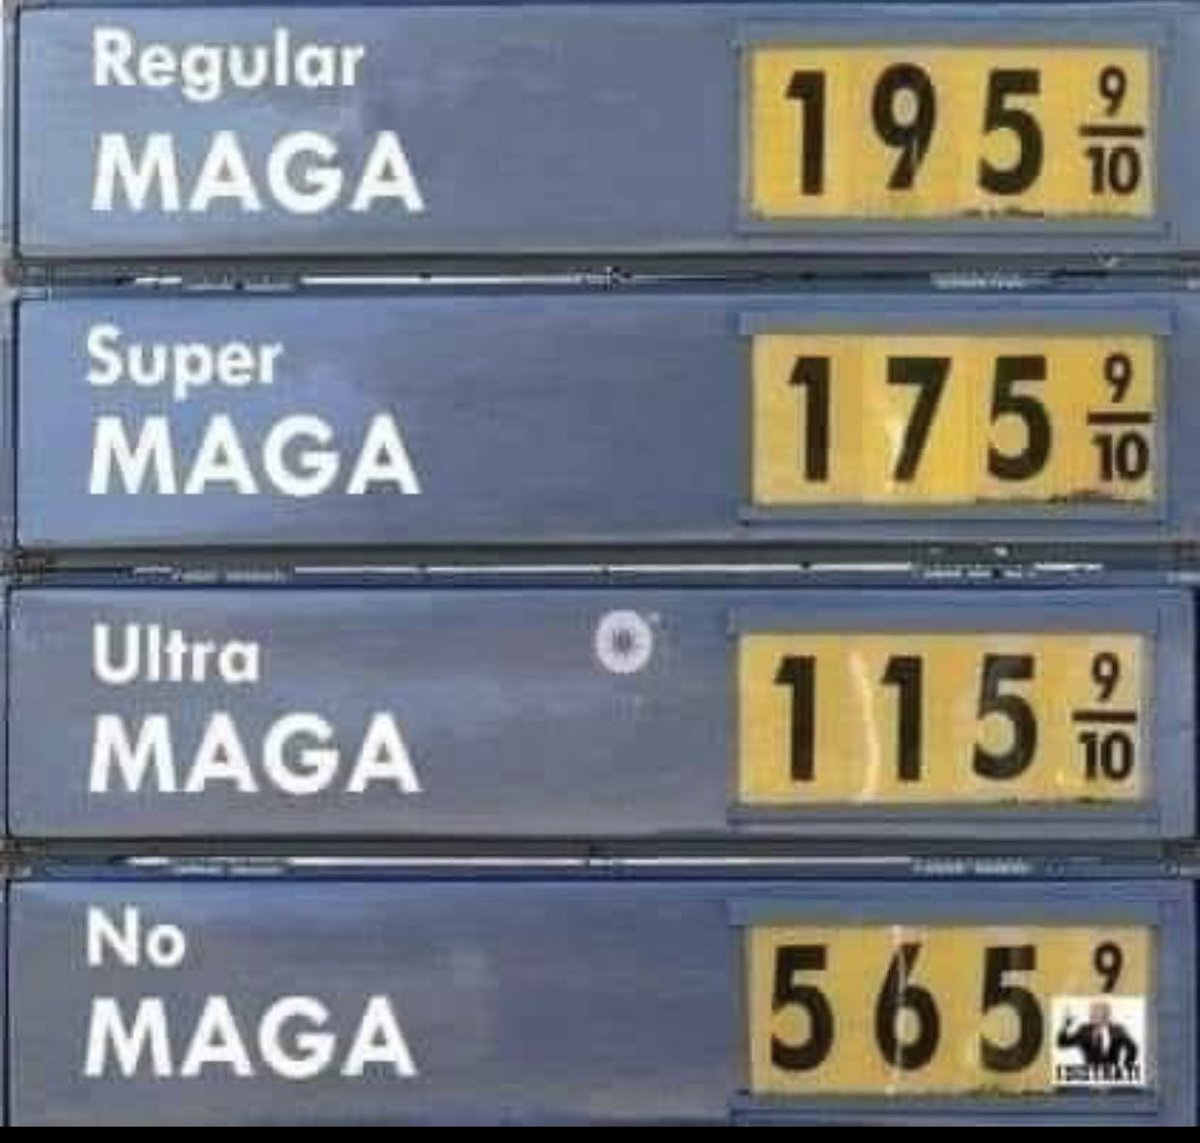 Lol - I don’t consider myself a #Trump devotee, but this meme is hilarious. As a marketer I appreciate the EPIC #WhiteHouse messaging FAIL that is “#UltraMAGA” I hear the term was the product of 6-mo.of research by liberal polling groups?! The right has embraced it wholeheartedly